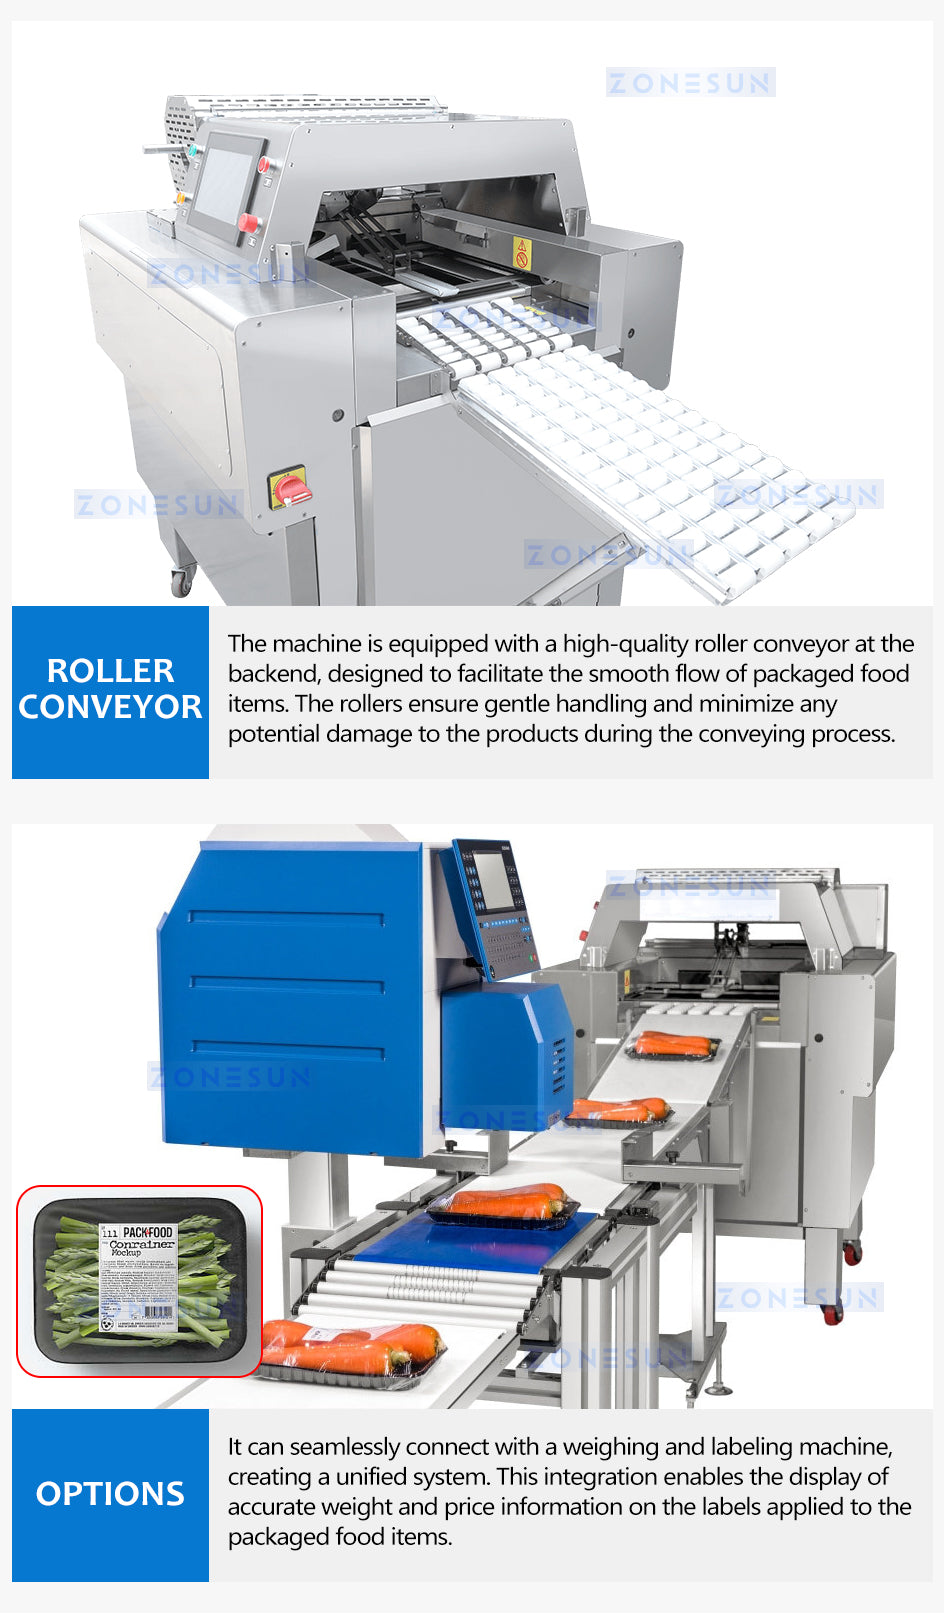 automatic wrapping machine